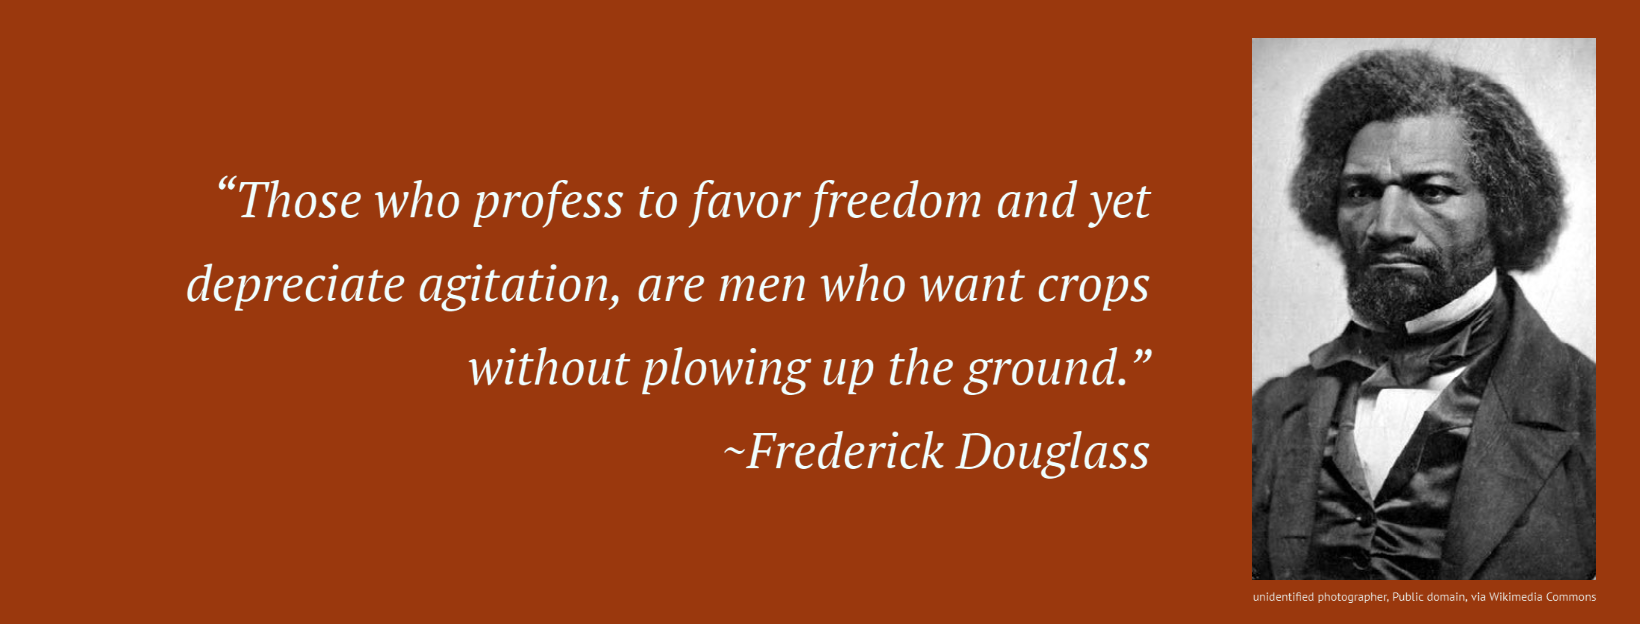 “Those who profess to favor freedom and yet depreciate agitation, are men who want crops without plowing up the ground.” ~Frederick Douglass